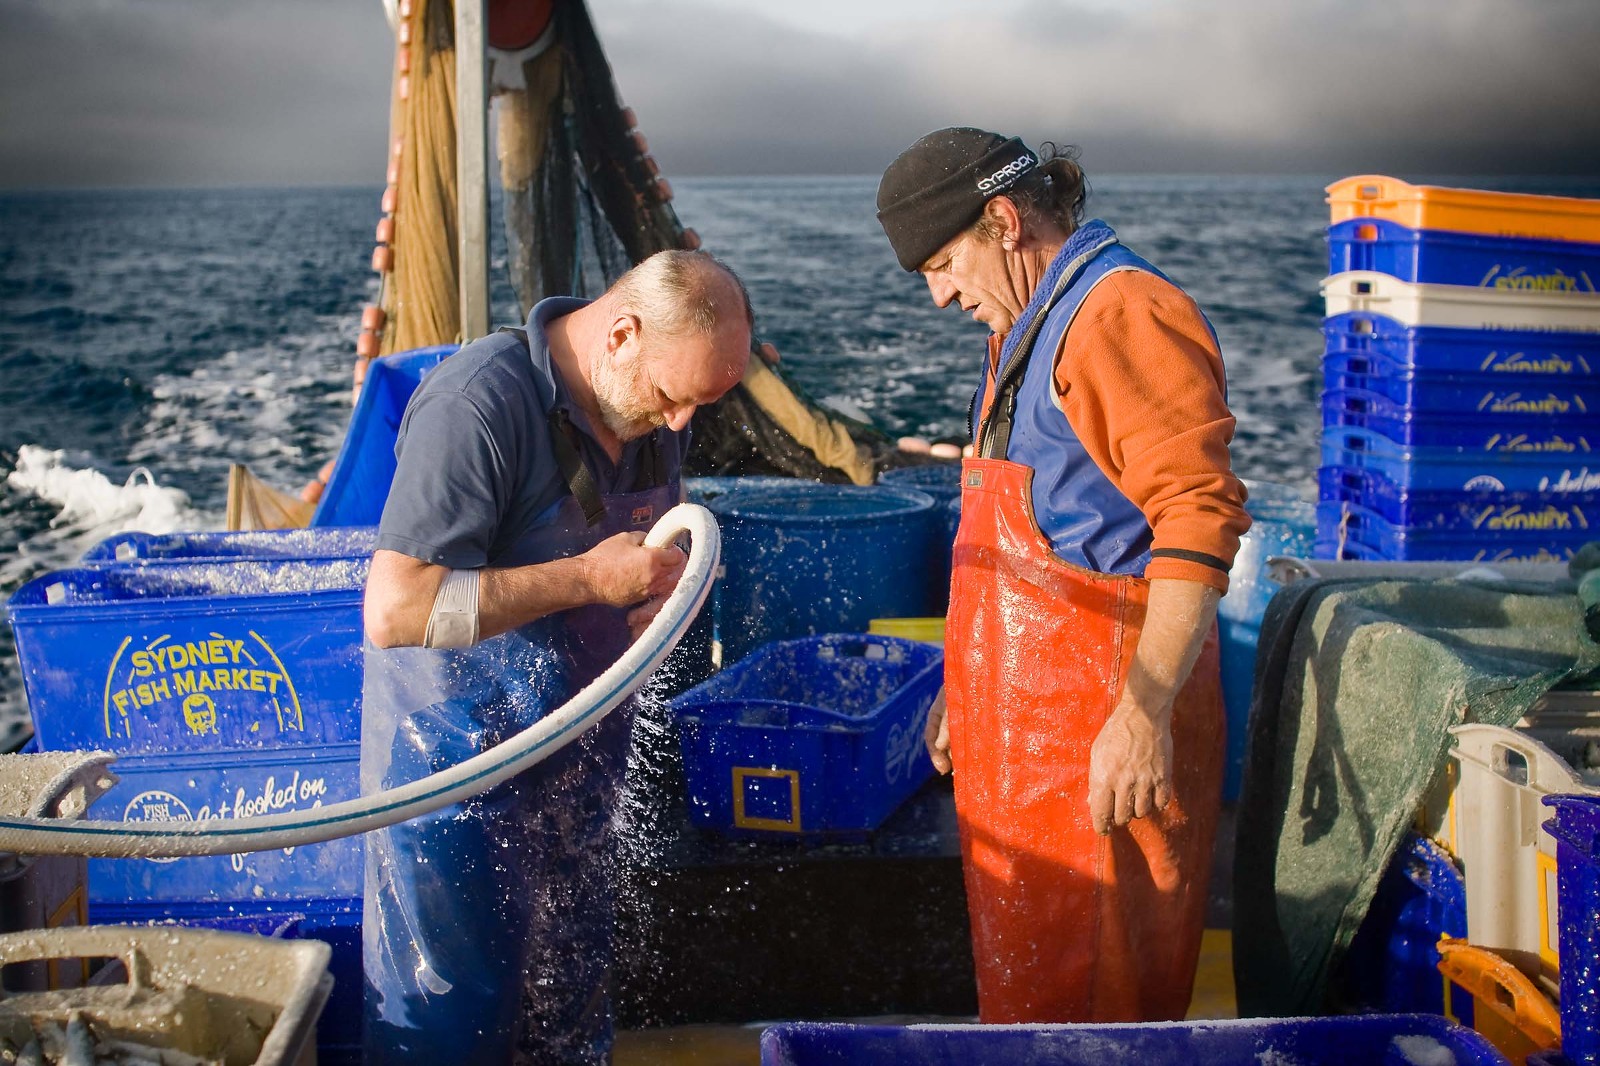 Editorial photography commercial fishing Melbourne Australia